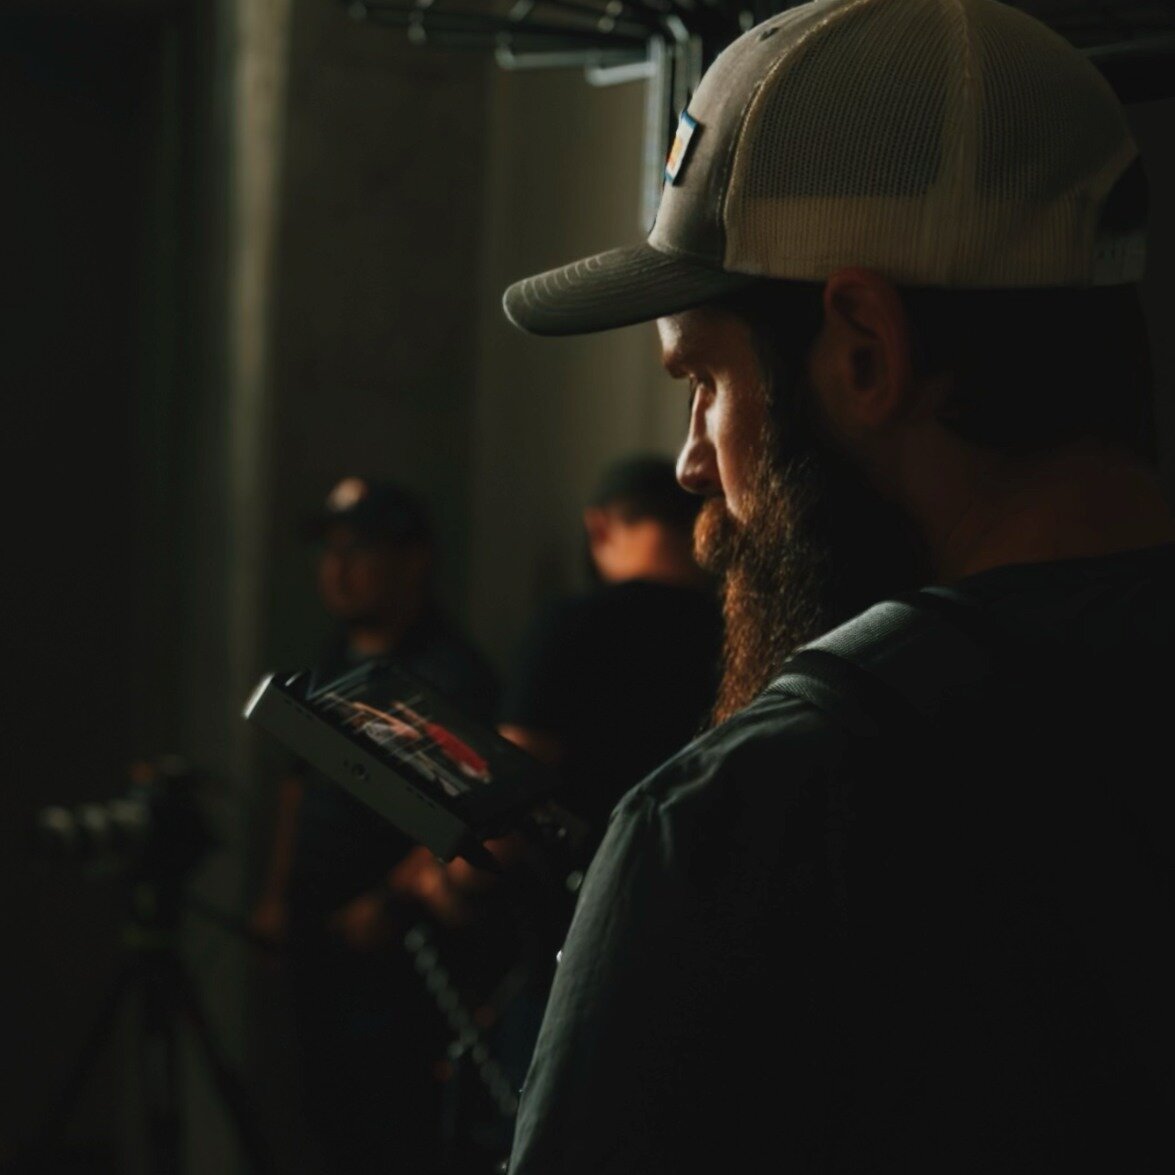 Why should you specifically hire a marketing team that uses a cinematographer and not just a videographer? For starters, cinematography is the art of storytelling through visually immersive and artistic camera work. It involves using high-end equipme